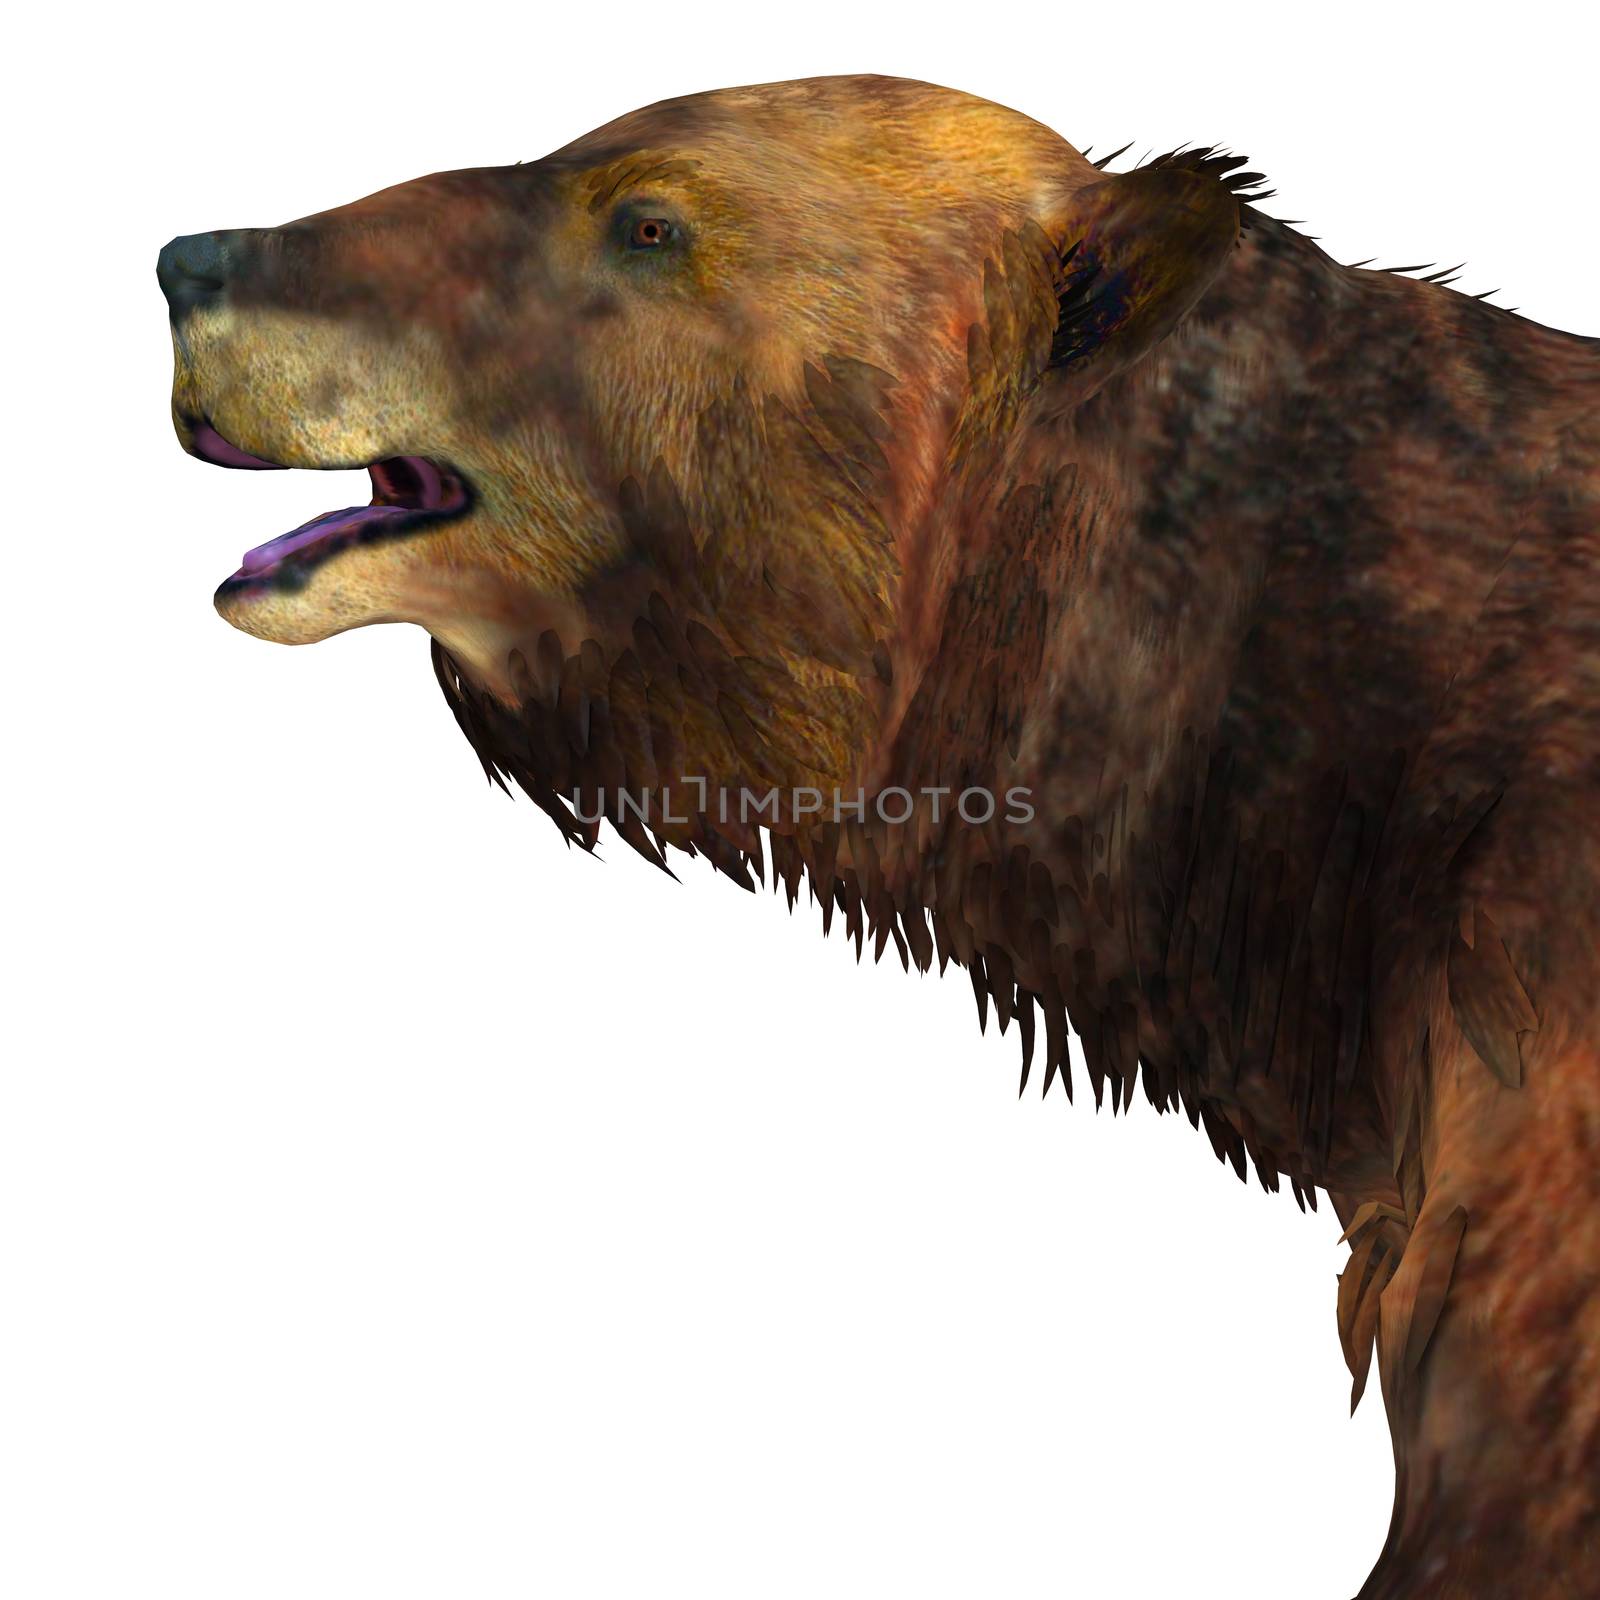 Megatherium was one of the largest ground sloths that lived in Central and South America in the Pliocene to the Pleistocene Periods.